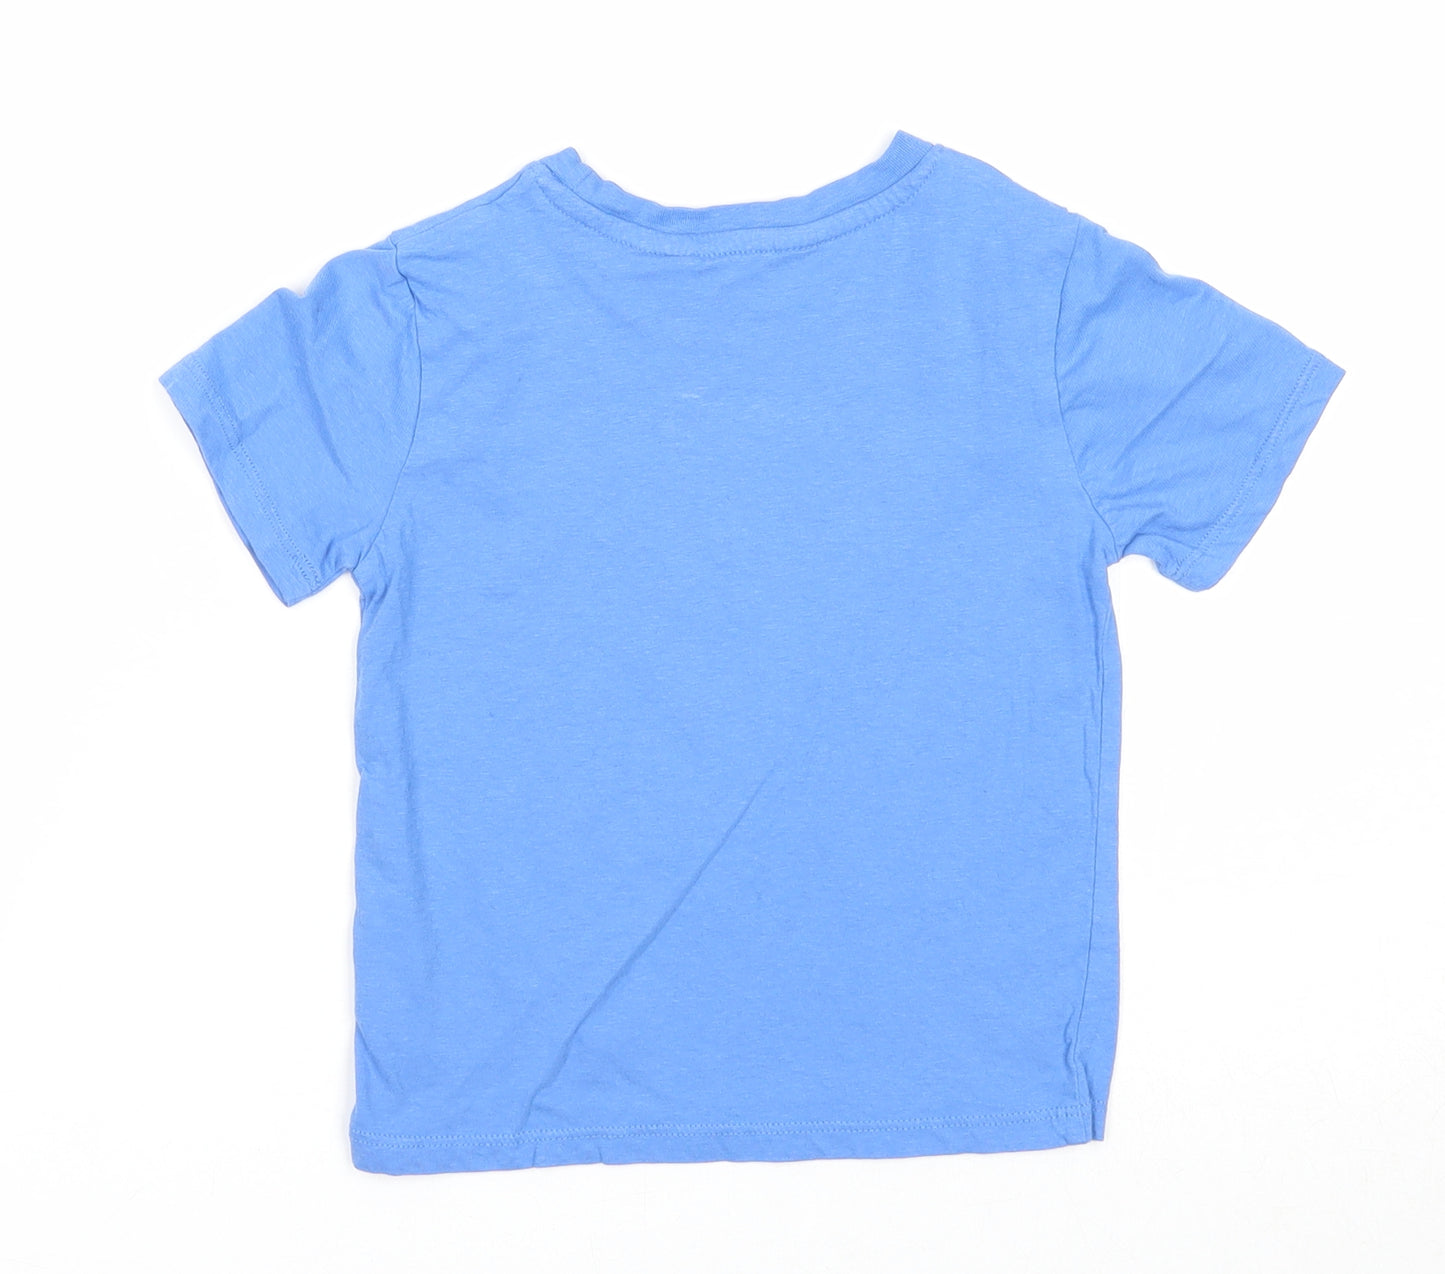 H&M Boys Blue Cotton Basic T-Shirt Size 2-3 Years Round Neck Pullover - Just Be You